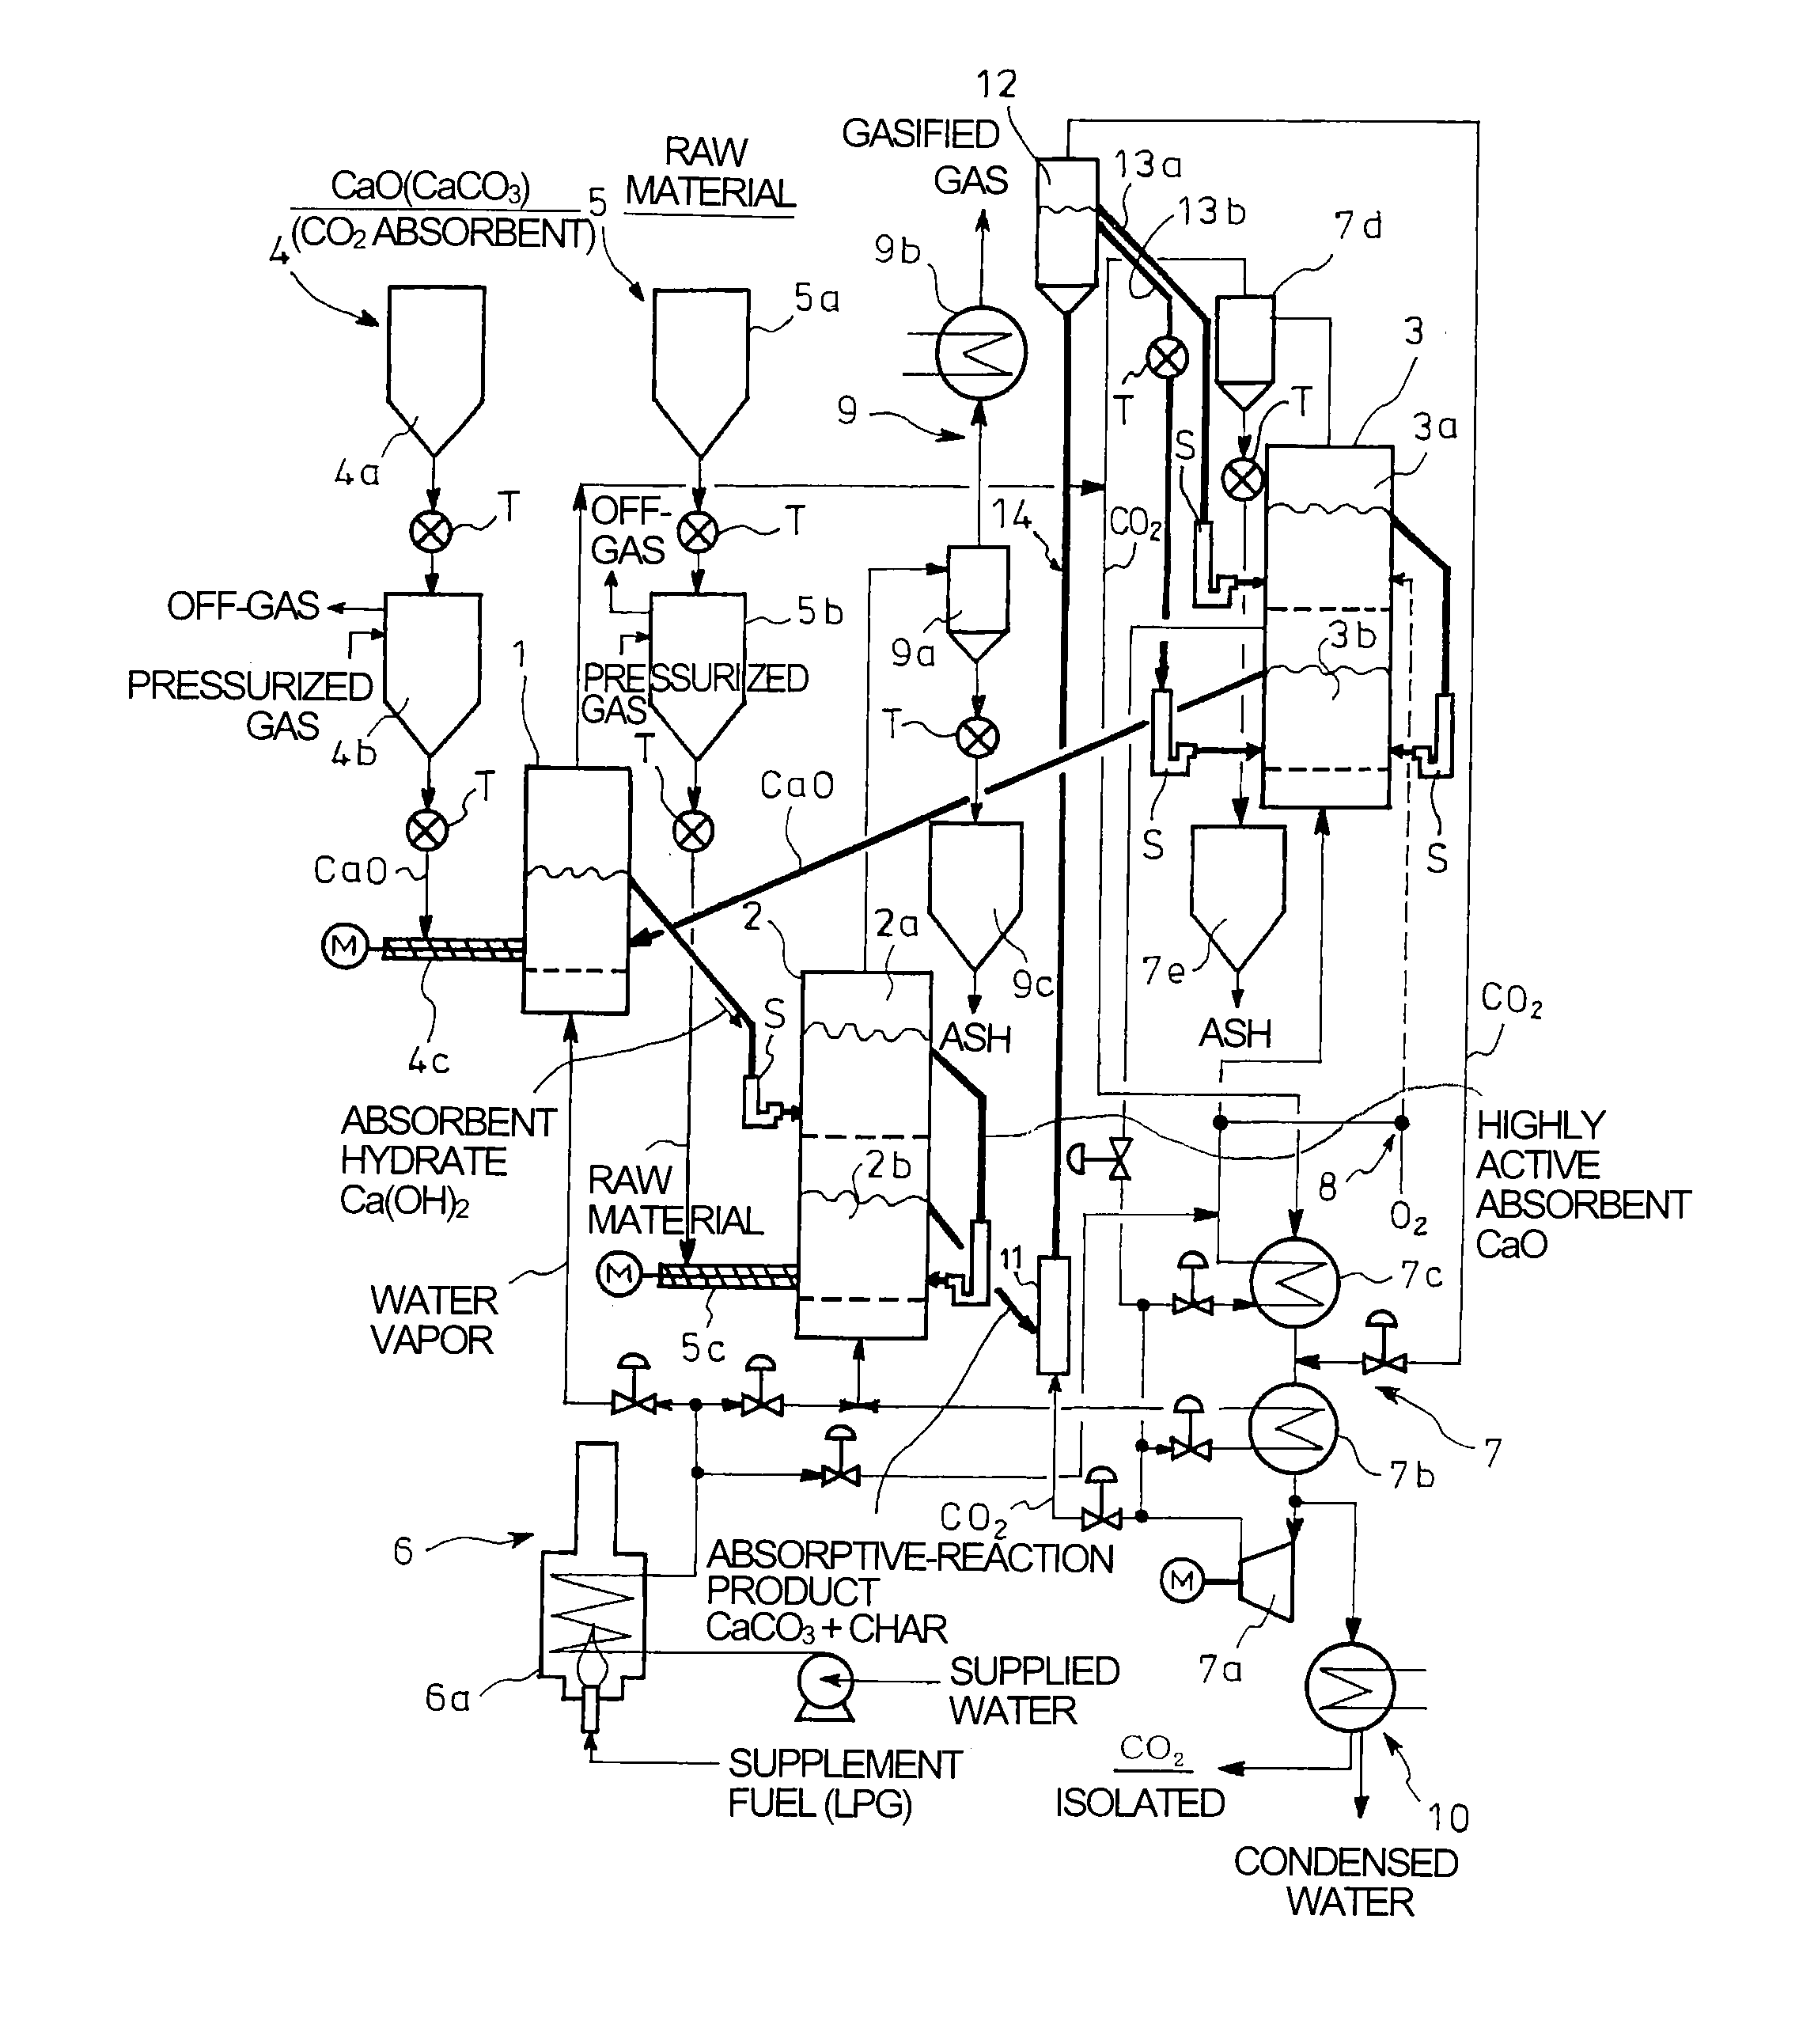 Method and apparatus for gasification with co2 recovery